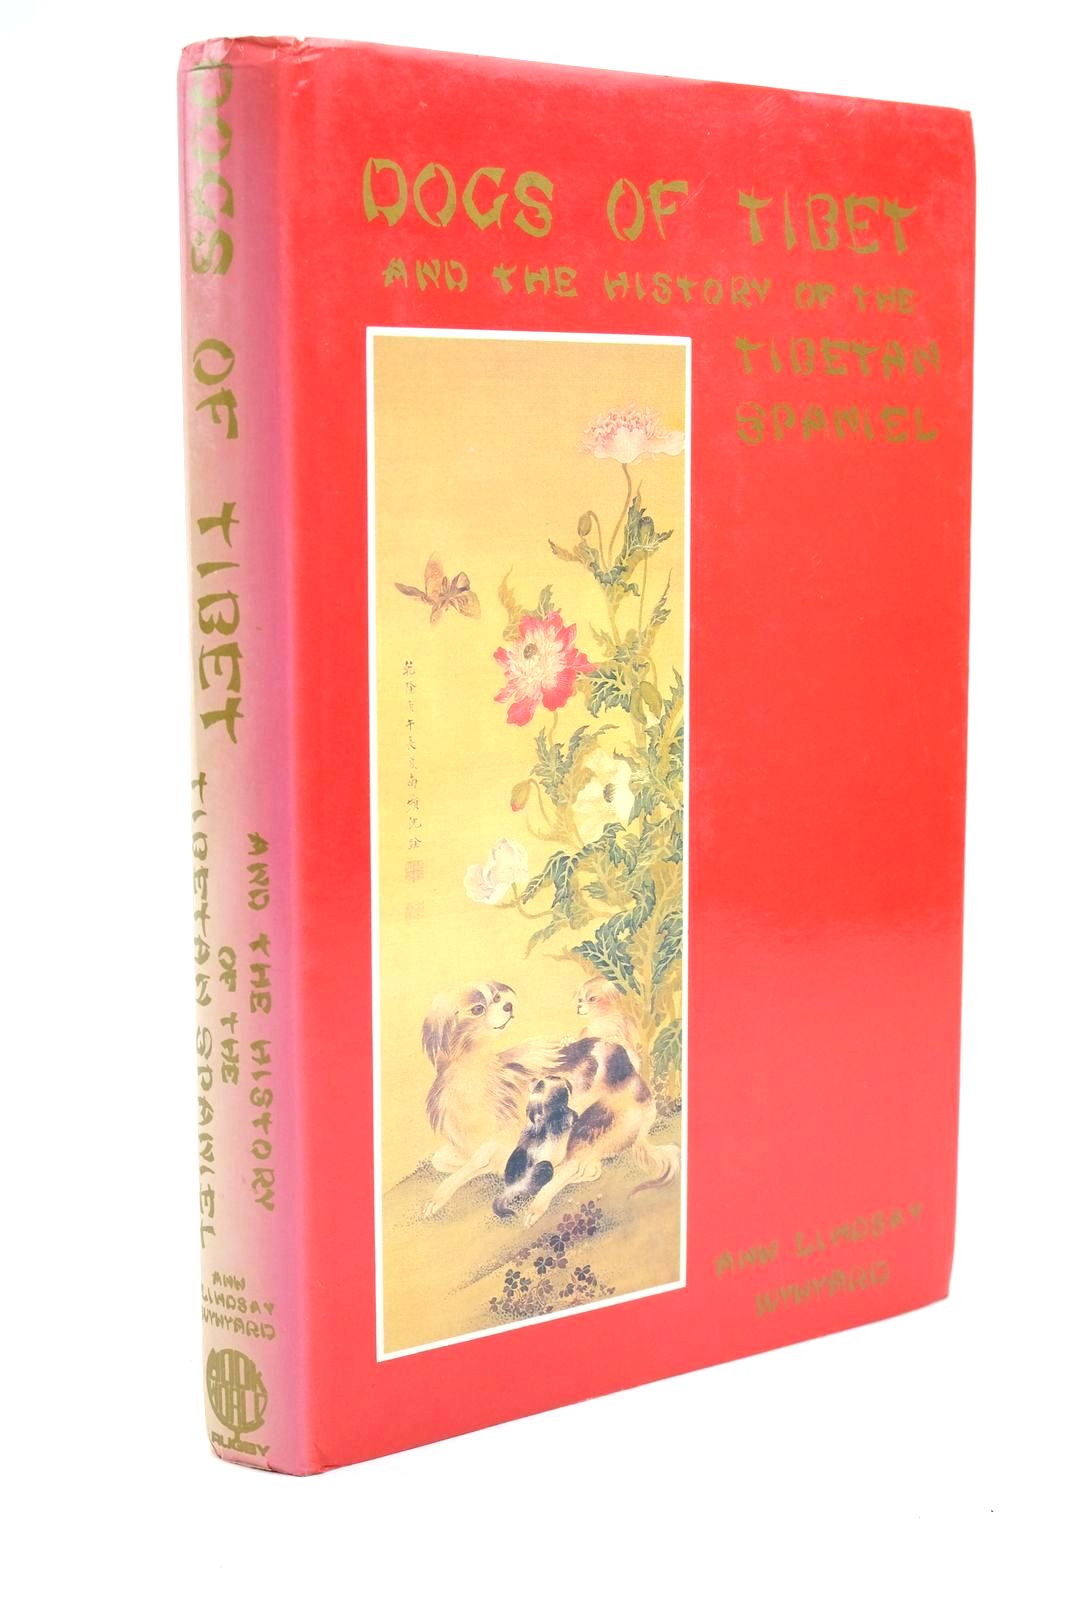 Photo of DOGS OF TIBET AND THE HISTORY OF THE TIBETAN SPANIEL written by Wynyard, Ann Lindsay published by Book World (STOCK CODE: 1323005)  for sale by Stella & Rose's Books